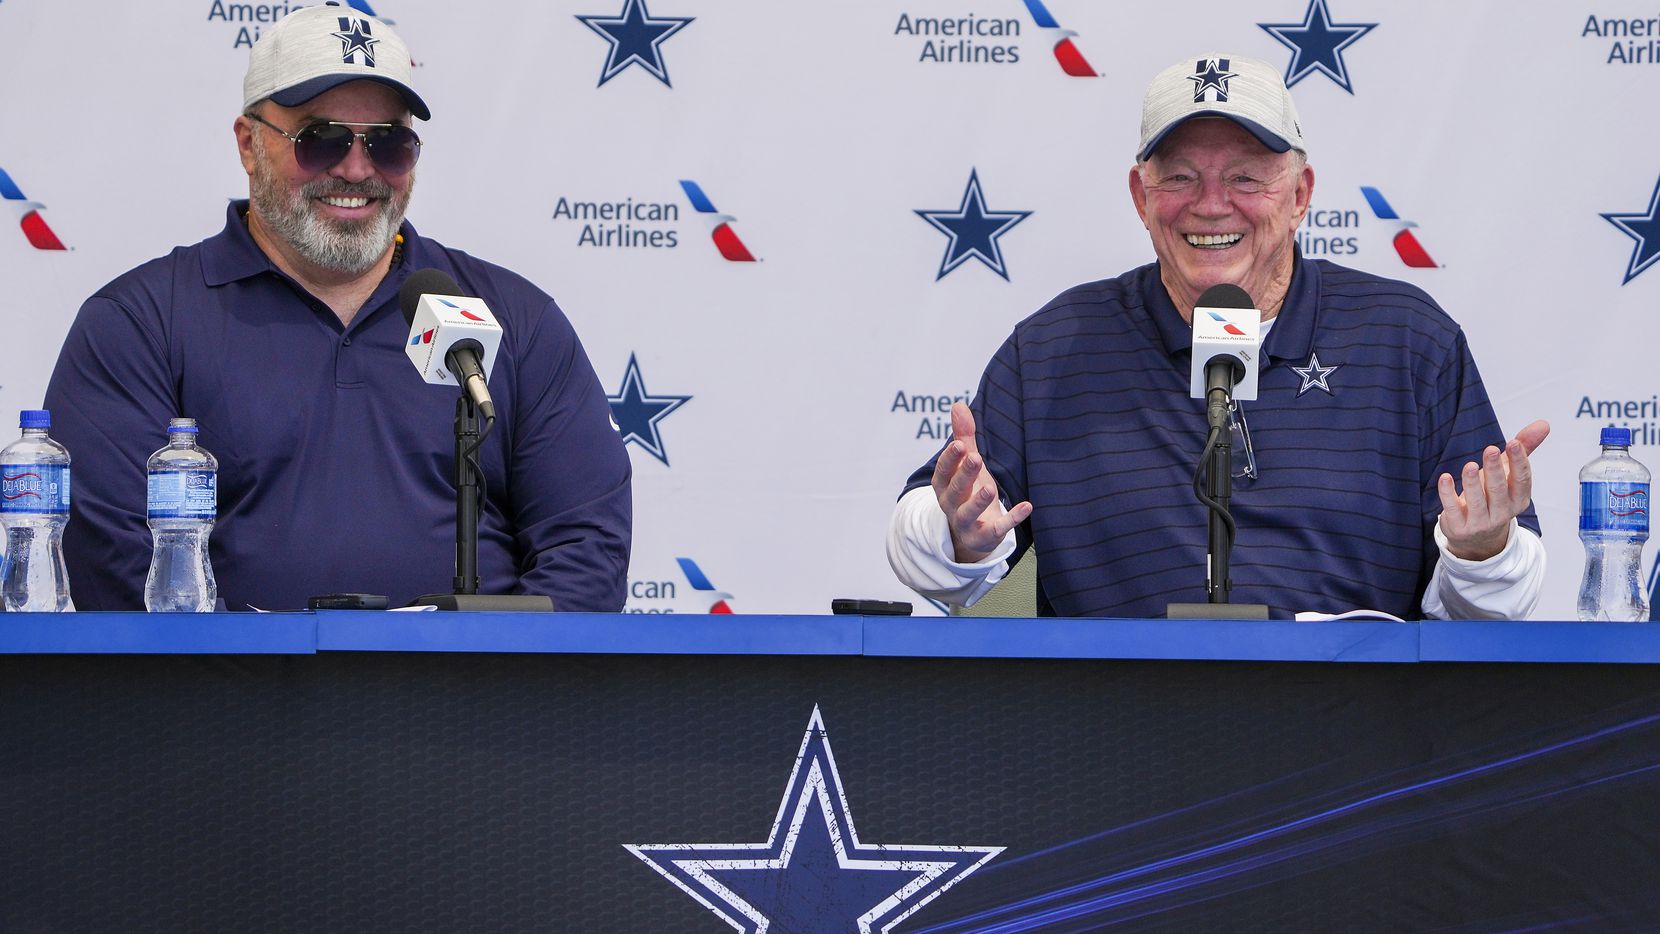 State of the Cowboys: Watch Jerry Jones, Mike McCarthy's press conference to open training camp